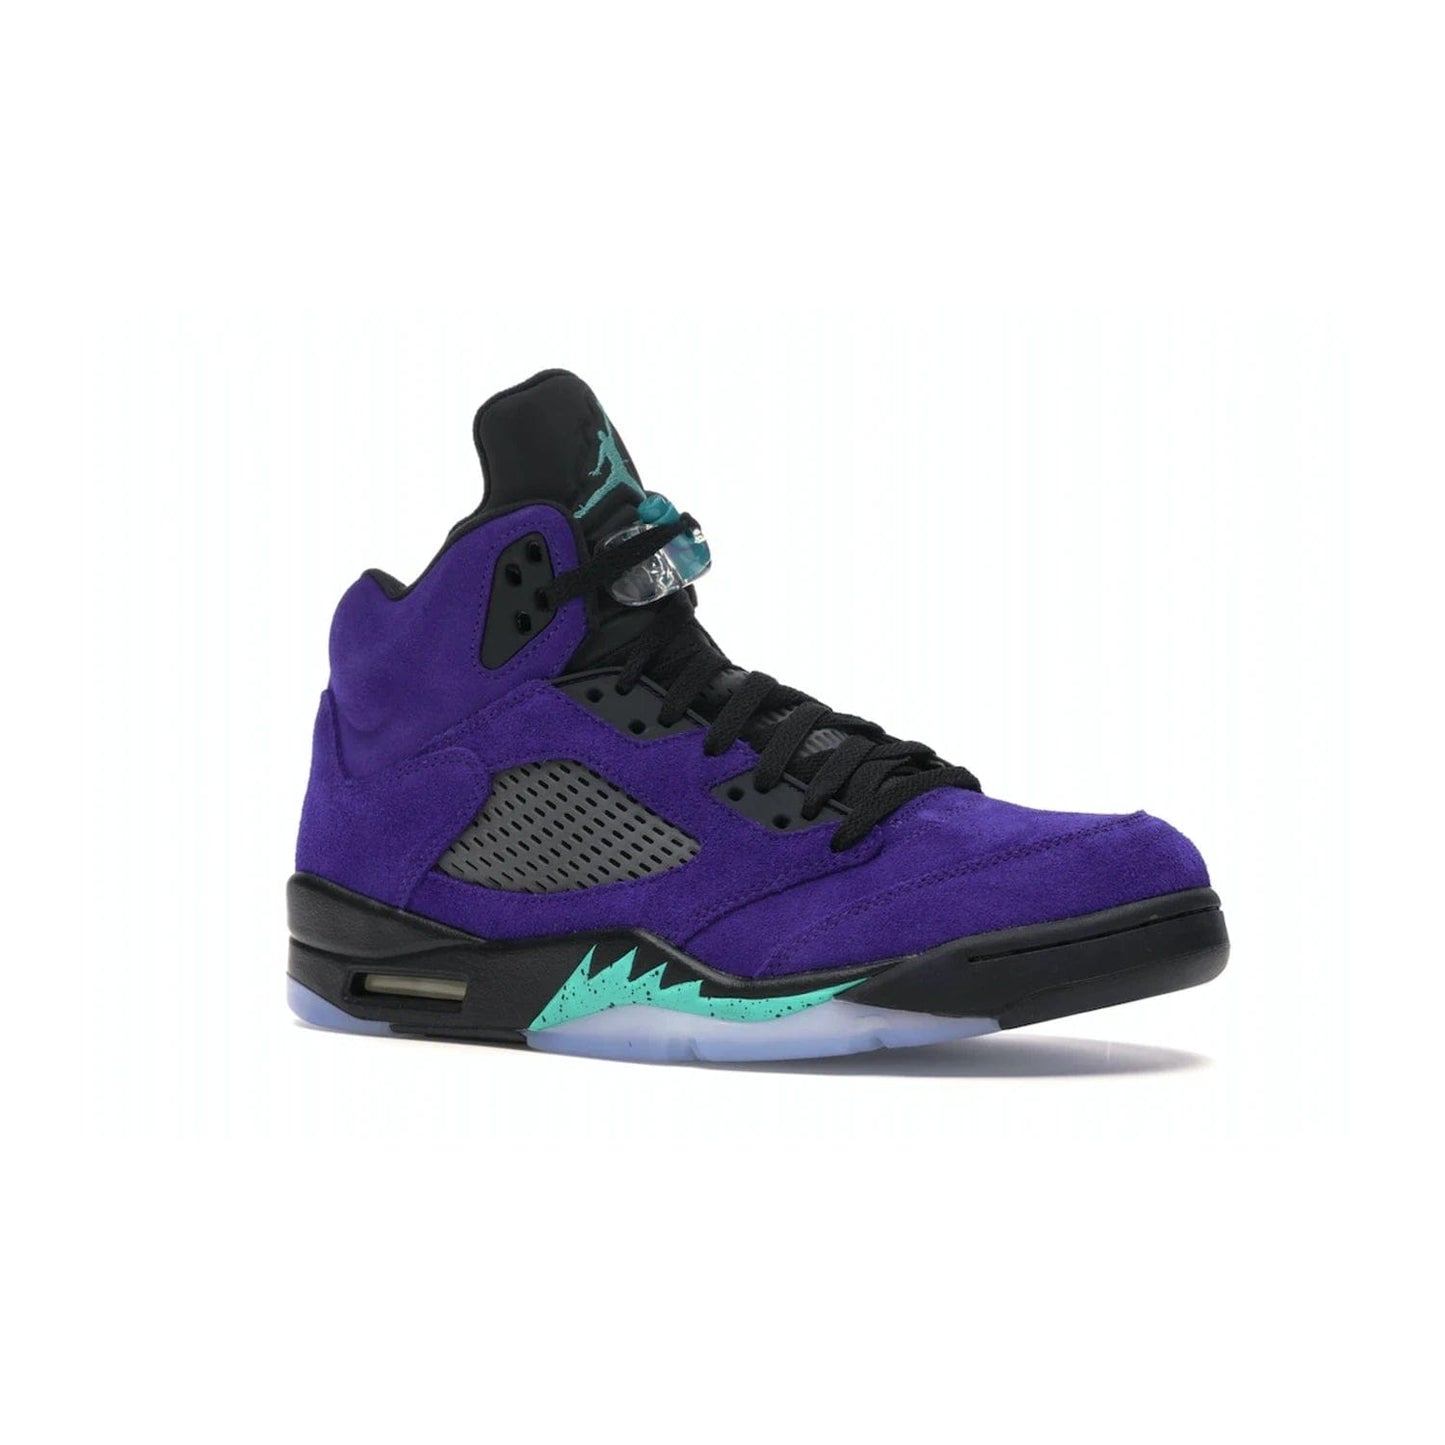 Jordan 5 Retro Alternate Grape - Image 4 - Only at www.BallersClubKickz.com - Bring the classic Jordan 5 Retro Alternate Grape to your sneaker collection! Featuring a purple suede upper, charcoal underlays, green detailing, and an icy and green outsole. Releasing for the first time since 1990, don't miss this chance to add a piece of sneaker history to your collection.